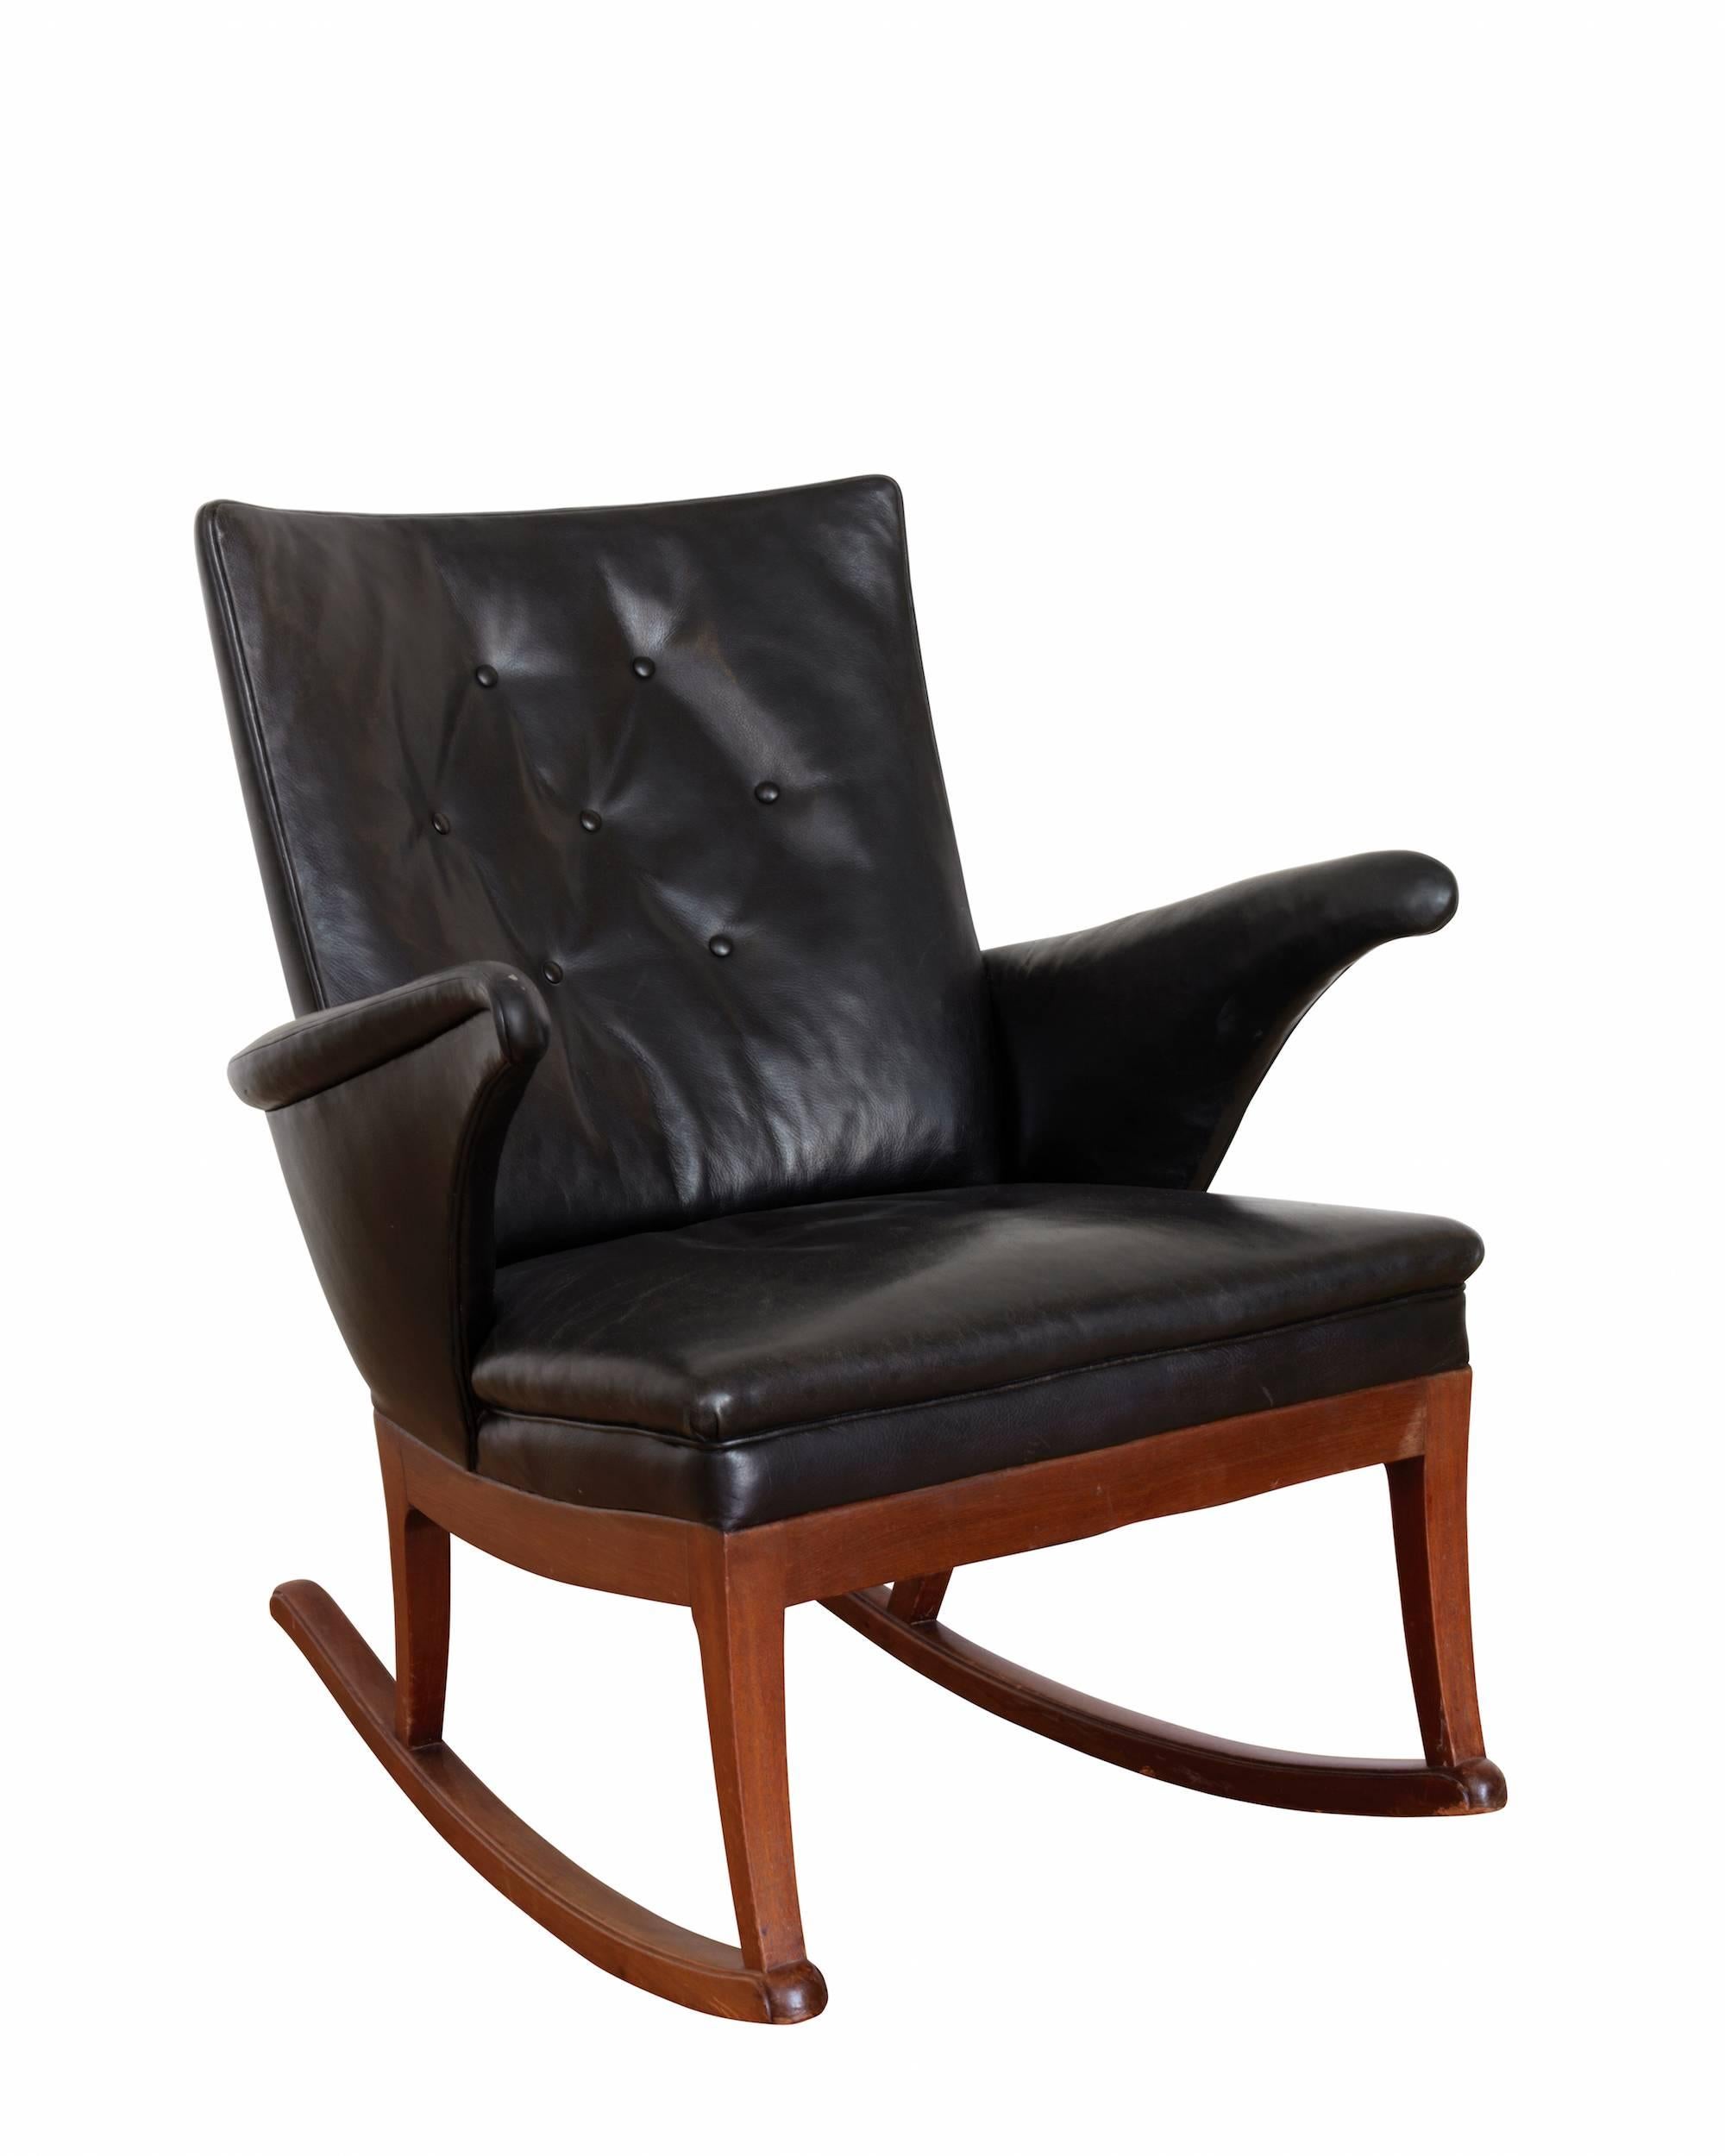 Rocking chair and matching stool with mahogany frame, upholstered in patinated black leather. Manufactured by Frits Henningsen in the 1950s.